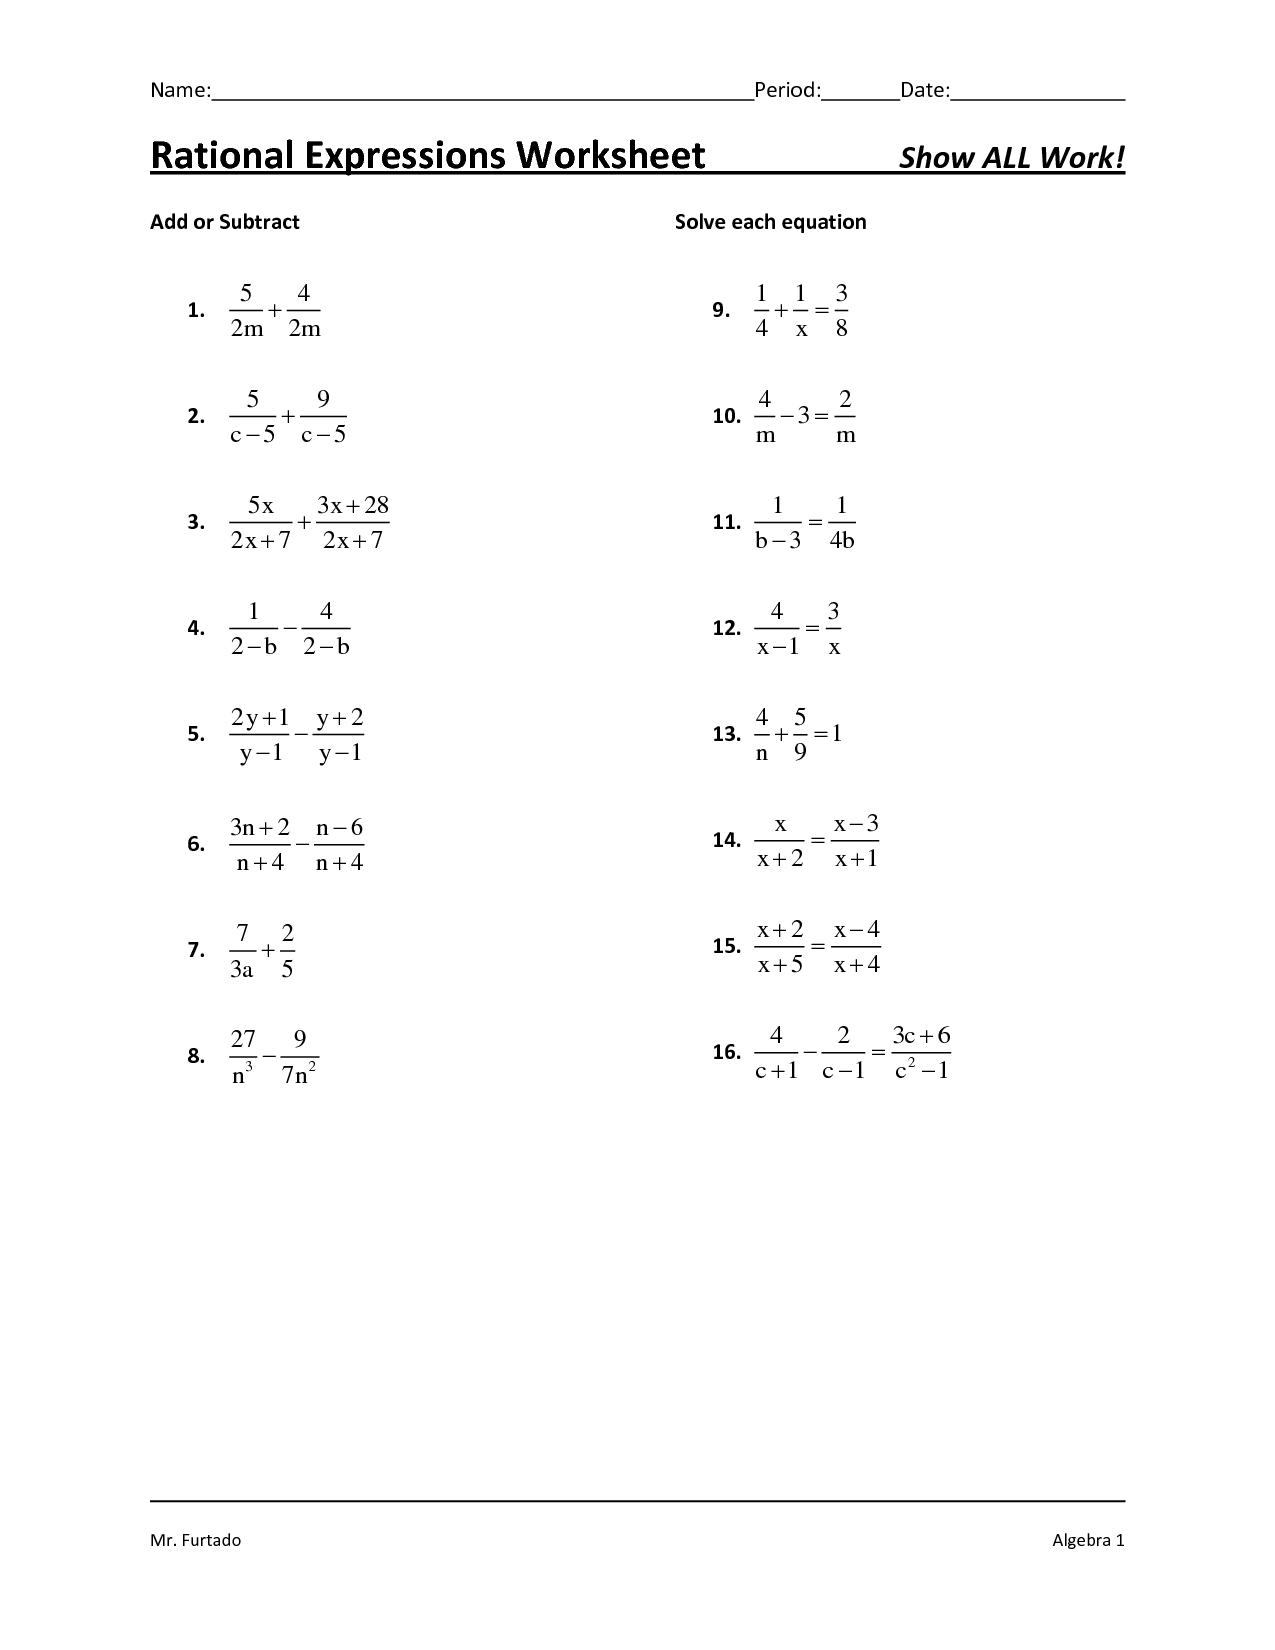 rational-expressions-and-equations-worksheet